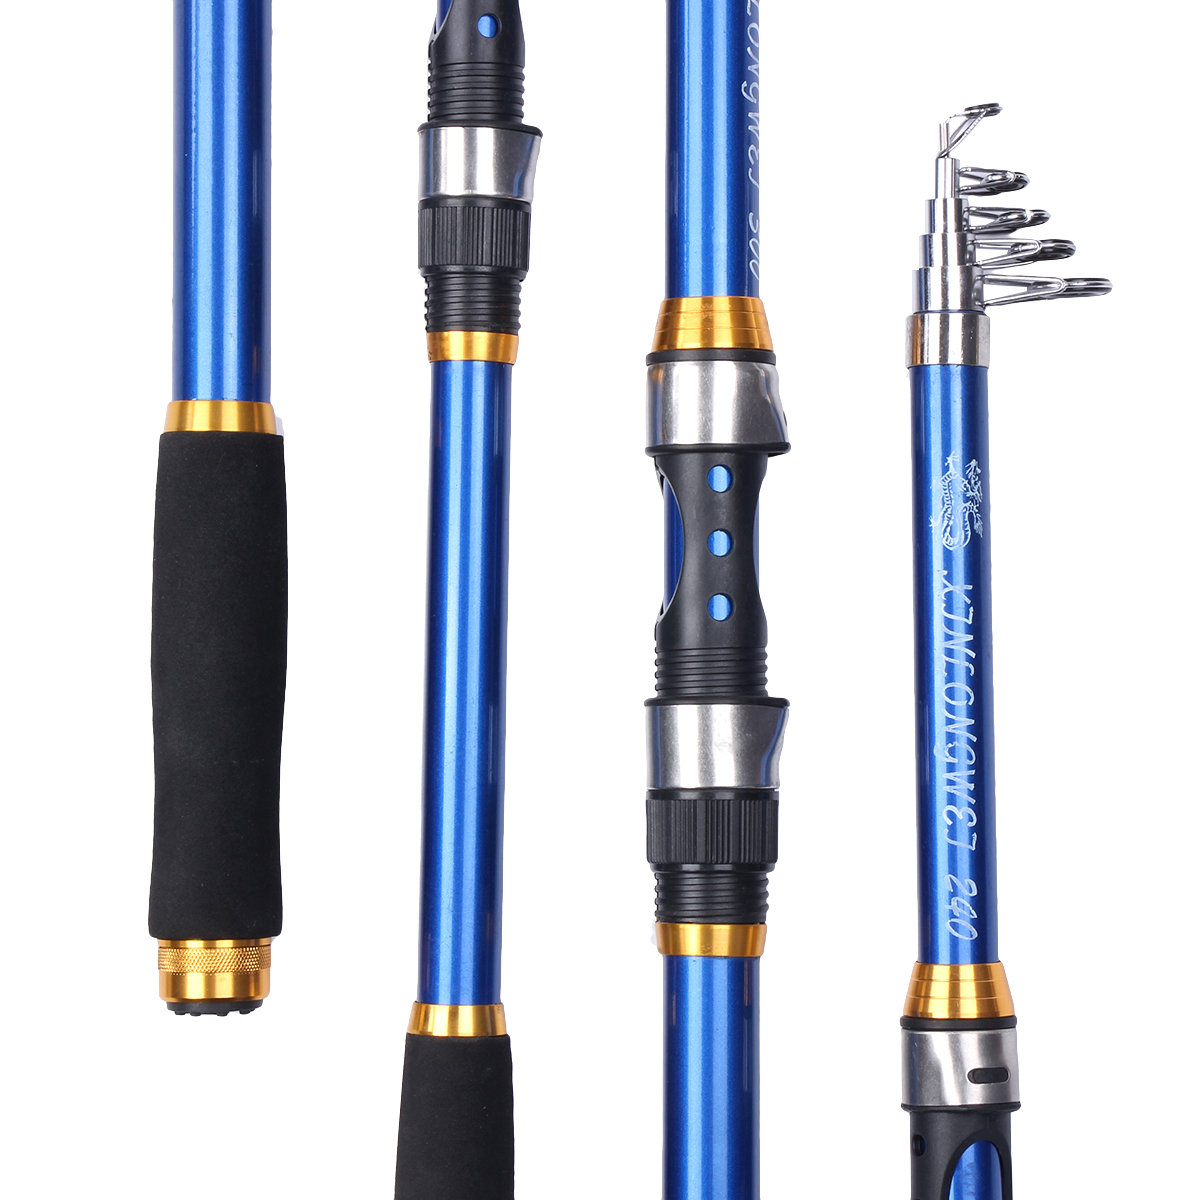 2124273036M-Telescopic-Fishing-Rod-Ultra-light-and-Sturdy-Long-distance-Casting-Rod-Outdoor-Fishing--1889795-12